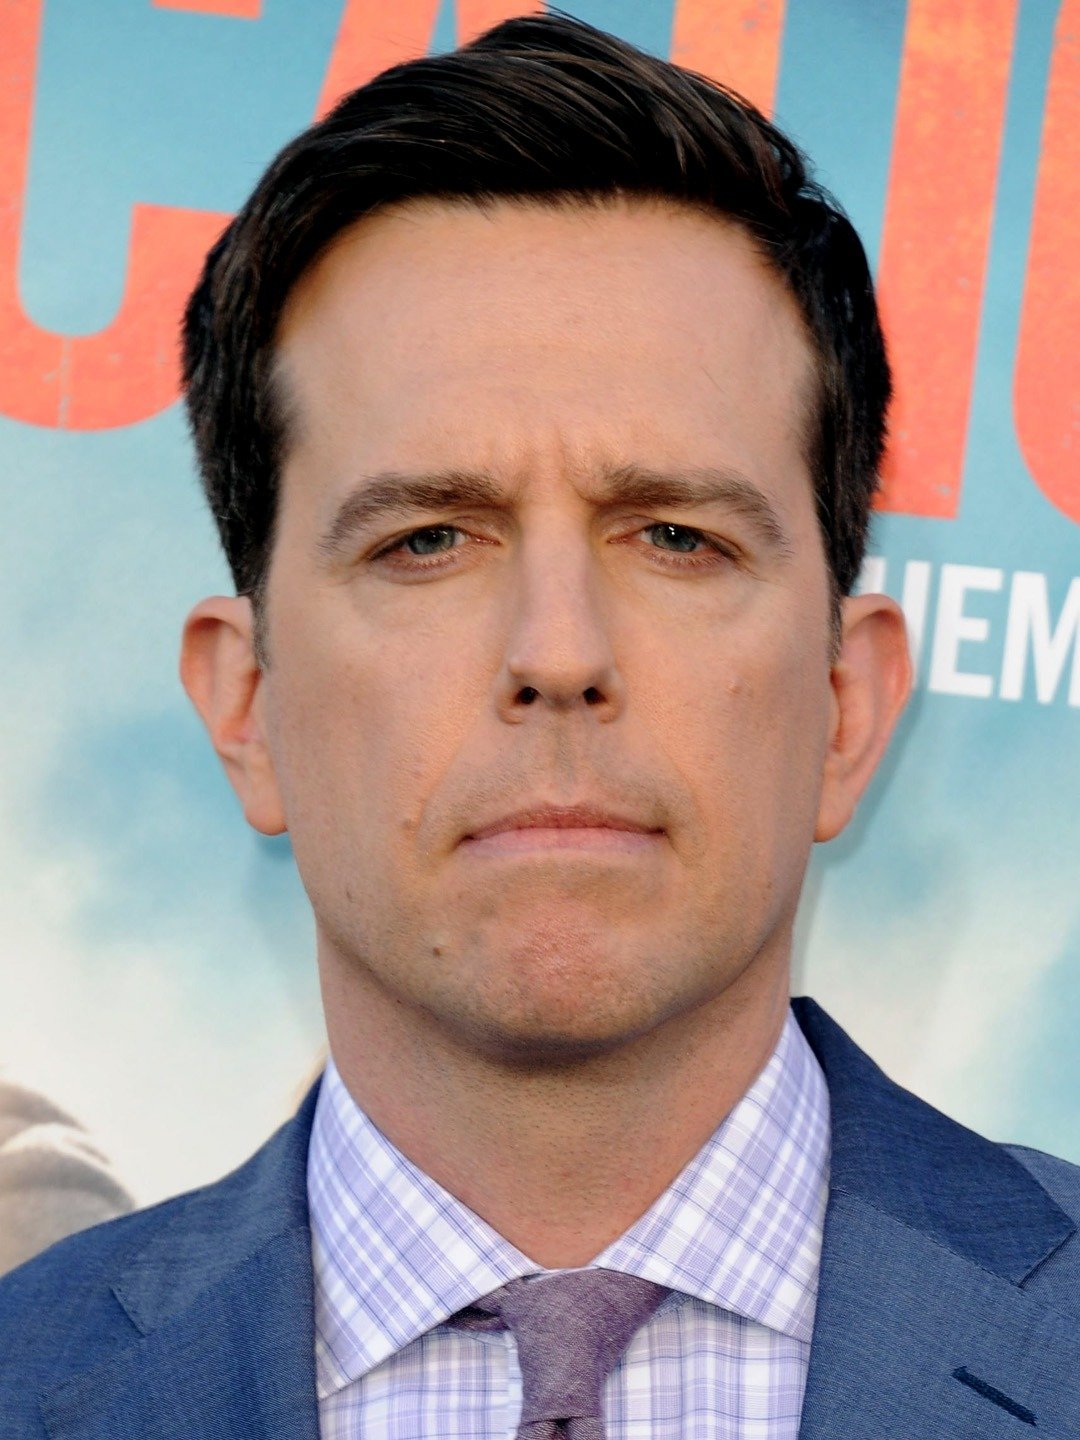 How tall is Ed Helms?